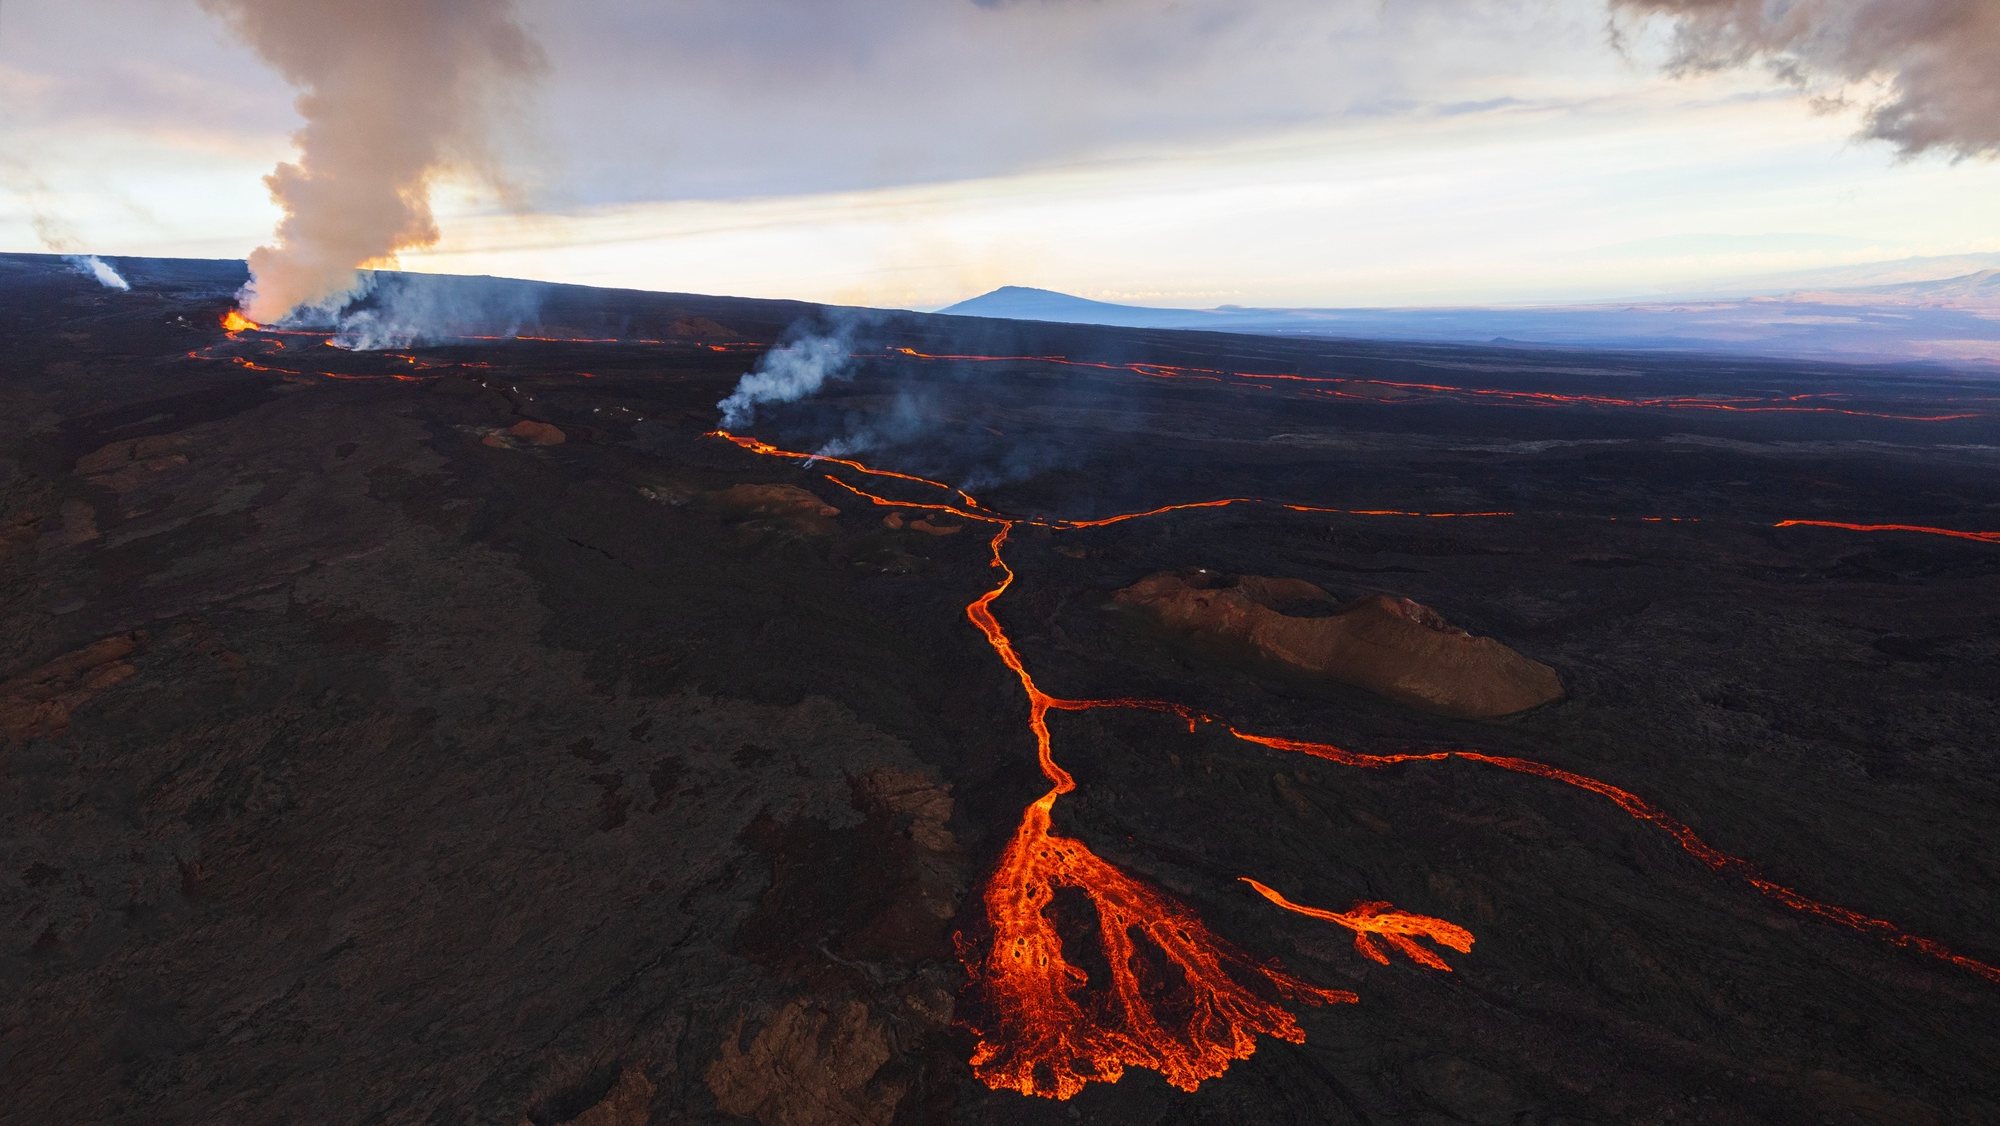 epa10340658 The world&#039;s largest active volcano, Mauna Loa, continues to erupt from its northeast rift, sending multiple rivers of lava downslope to the north, with one lobe flowing east in the direction of Hilo, on the Island of Hawaii, Hawaii, USA, 30 November 2022.  EPA/BRUCE OMORI/PARADISE HELICOPTERS